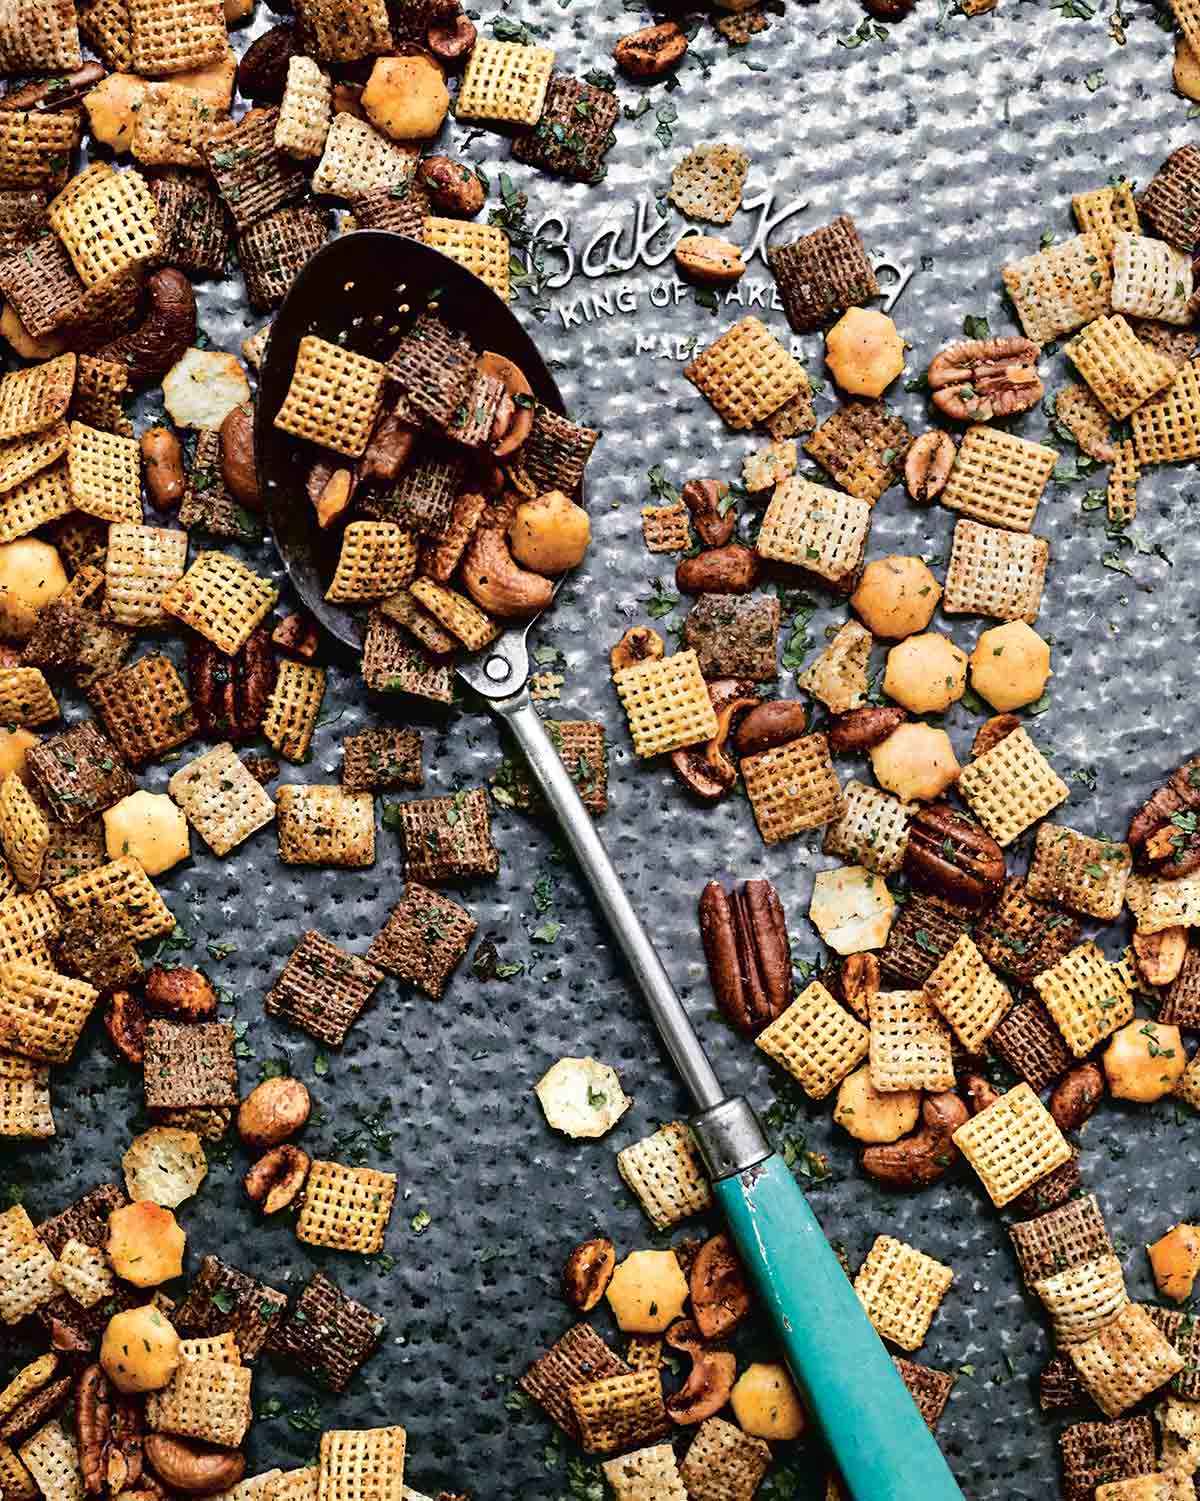 A tray of homemade Chex mix with a large spoon resting in the middle.